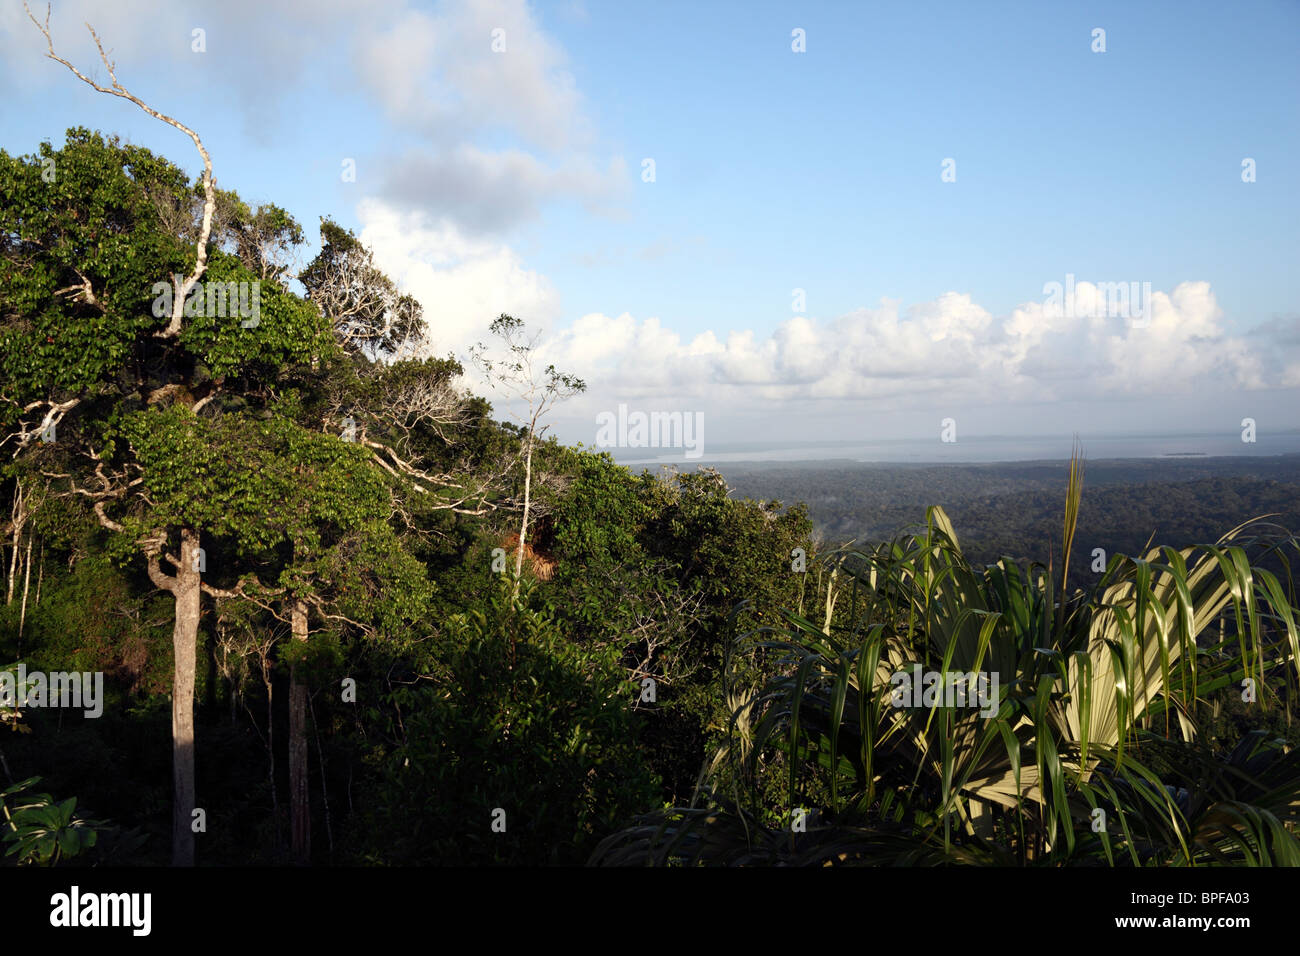 Cloud forest in the Comarca de San Blas on the road to Carti , Caribbean Sea in background, Panama Stock Photo